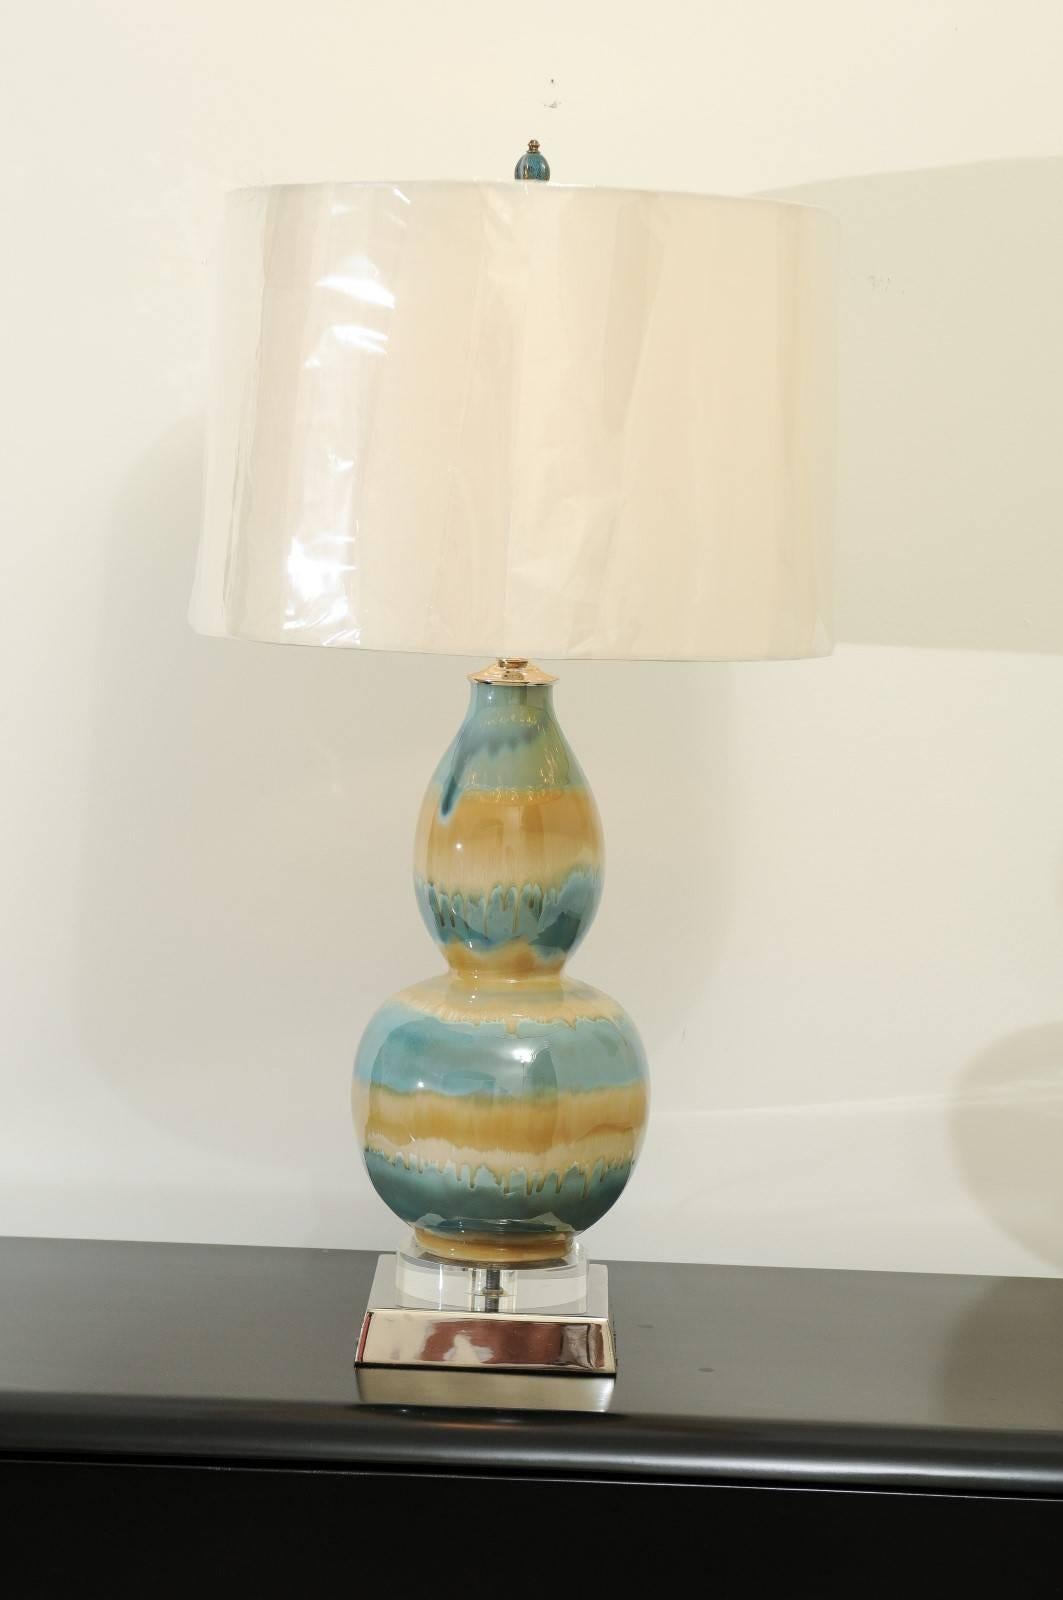 A stunning pair of vintage ceramic drip-glaze vessels as custom-made lamps. Beautiful gourd form with fabulous coloring and sheen. Built using components of only the finest quality. Exquisite jewelry! Excellent restored condition. Wired using clear